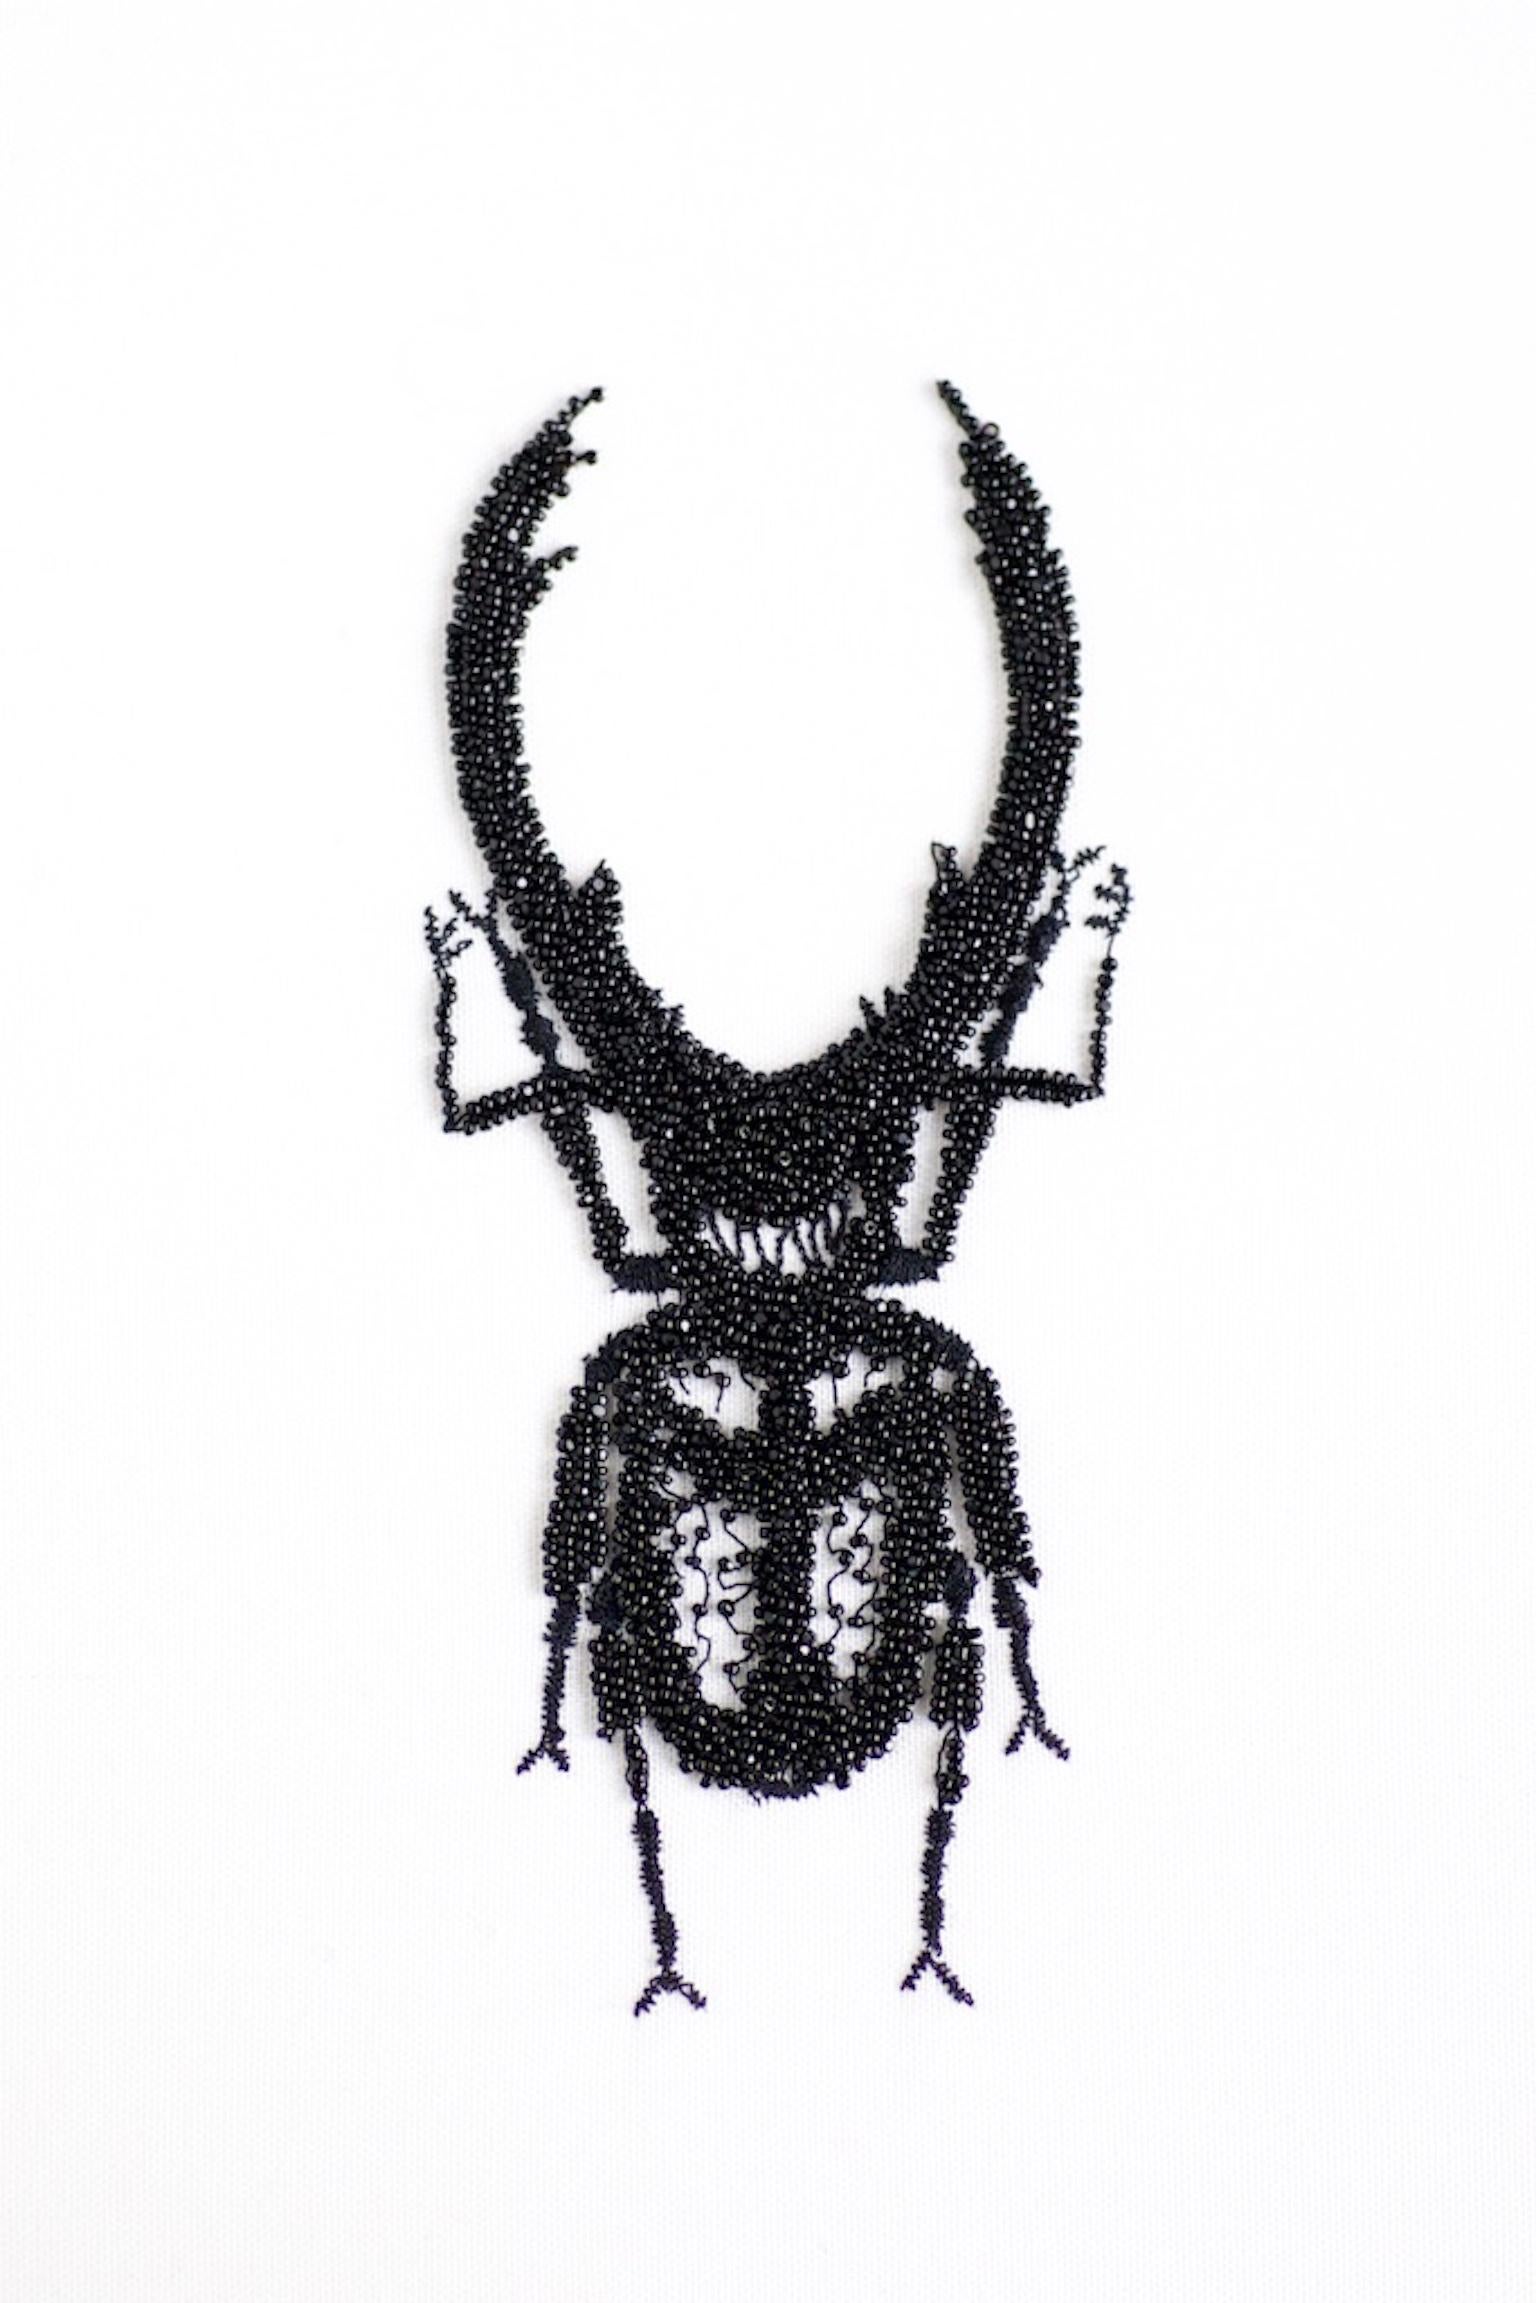 Embroidered insects by Kyoko Sugiura: Insect figured French embroidery in black pearls. 
